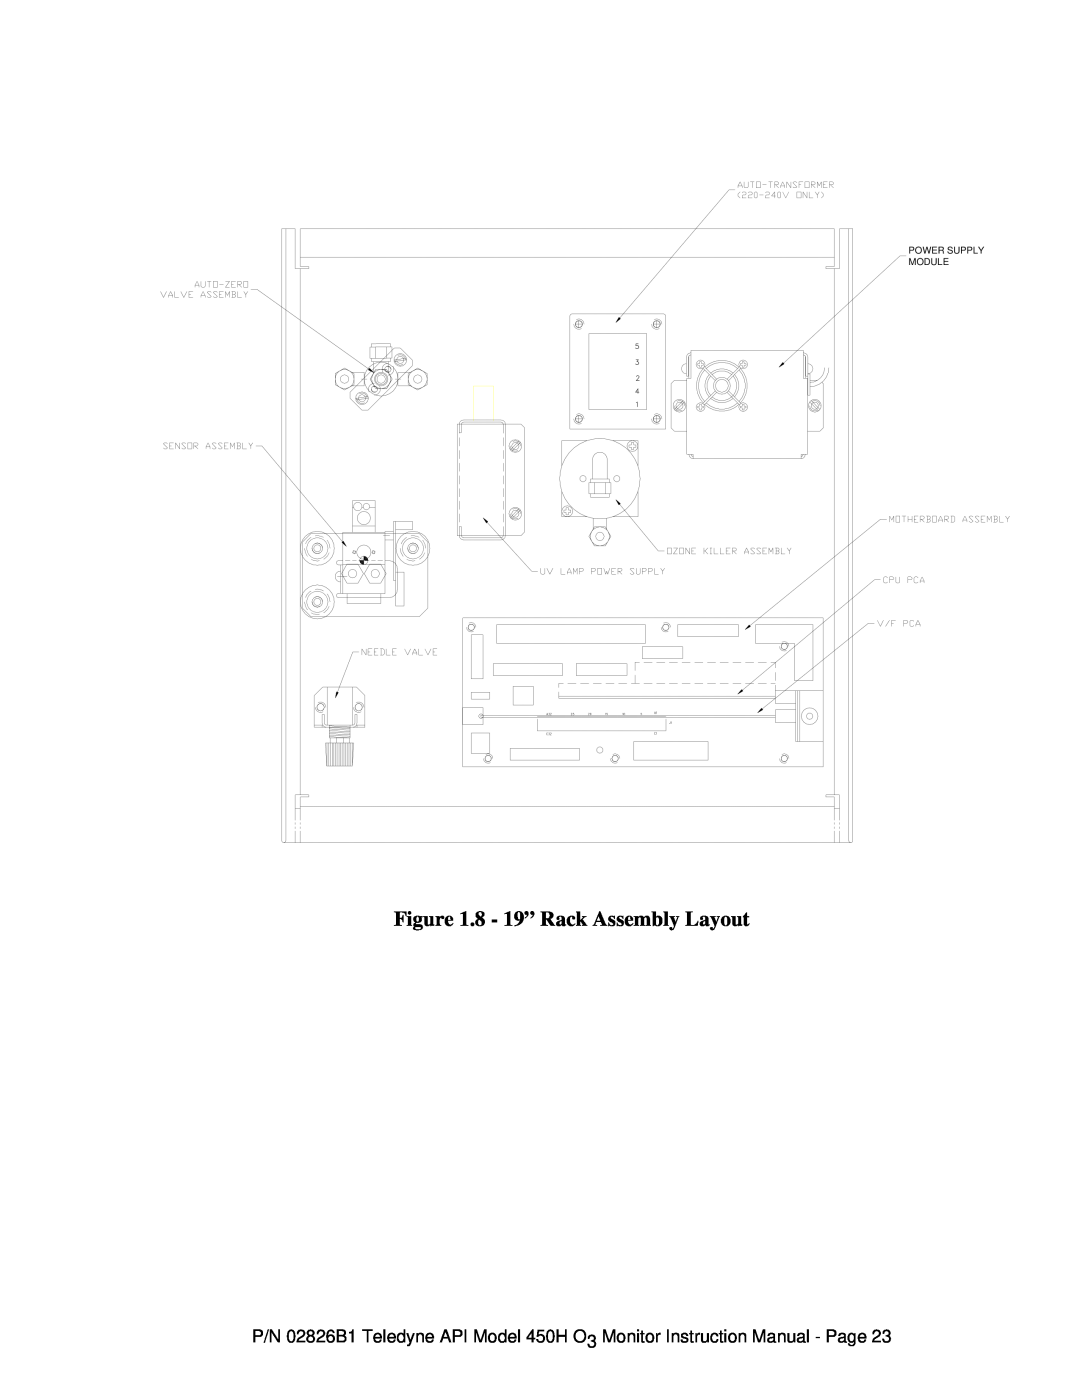 Teledyne 450H instruction manual 8 - 19” Rack Assembly Layout, Power Supply Module 